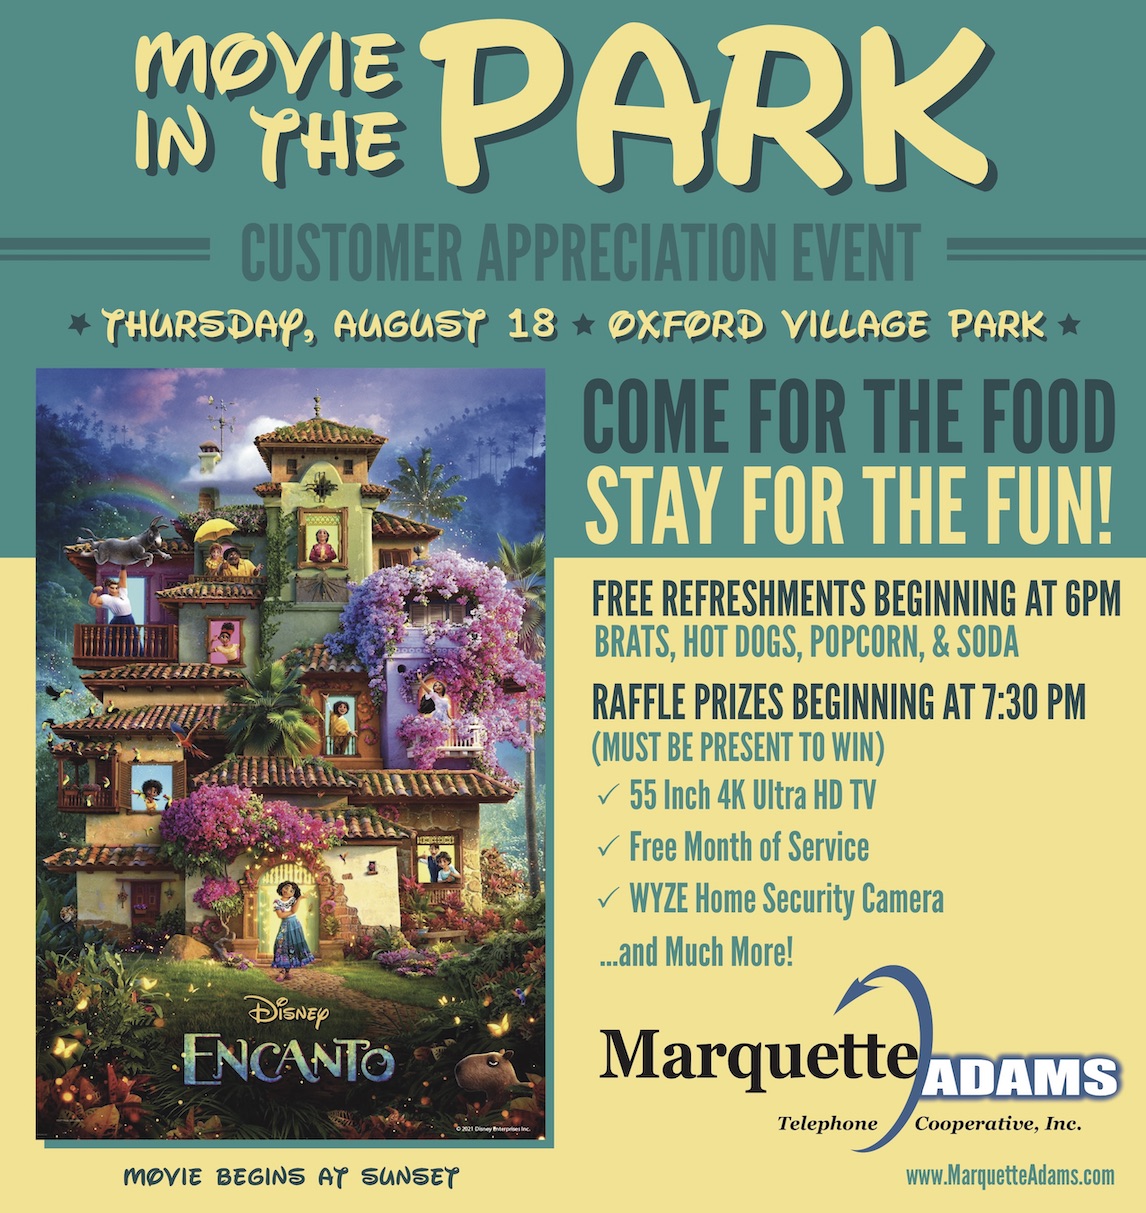 Movie in the Park - Download Graphics to View